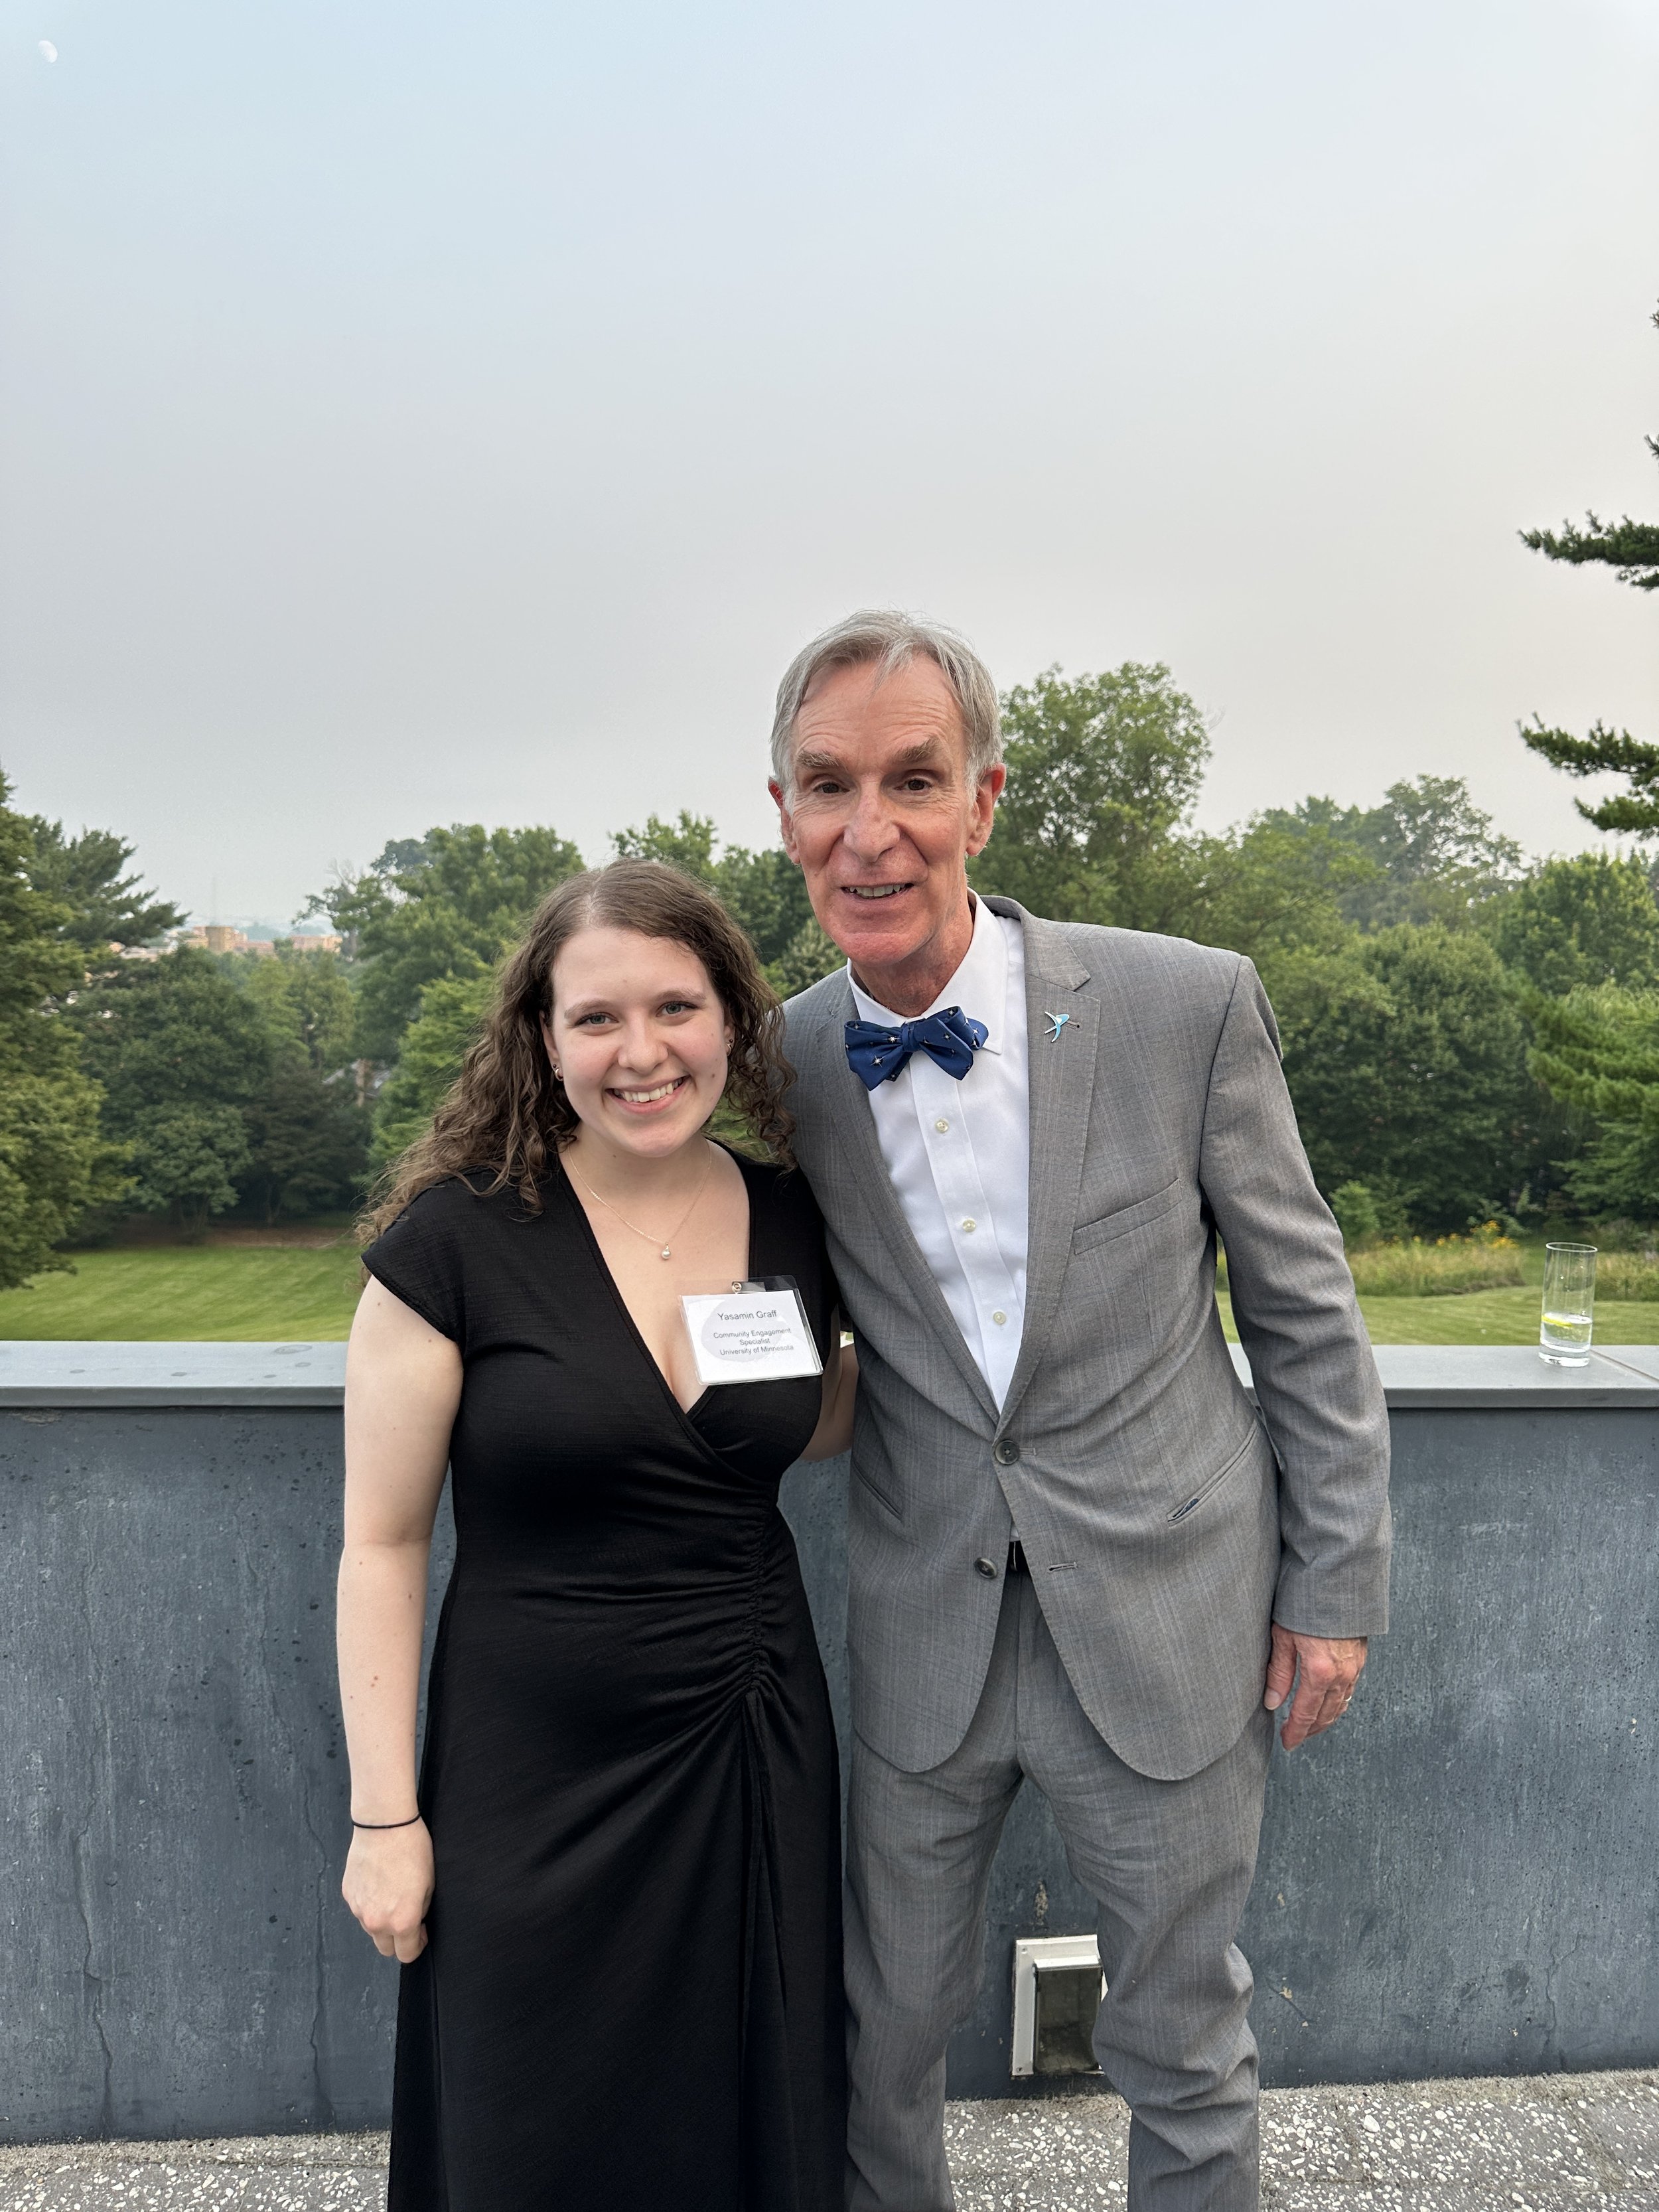  Yasamin Graff pictured with Bill Nye at a Planetary Society dinner at the Swiss Ambassador's home in Washington D.C. 